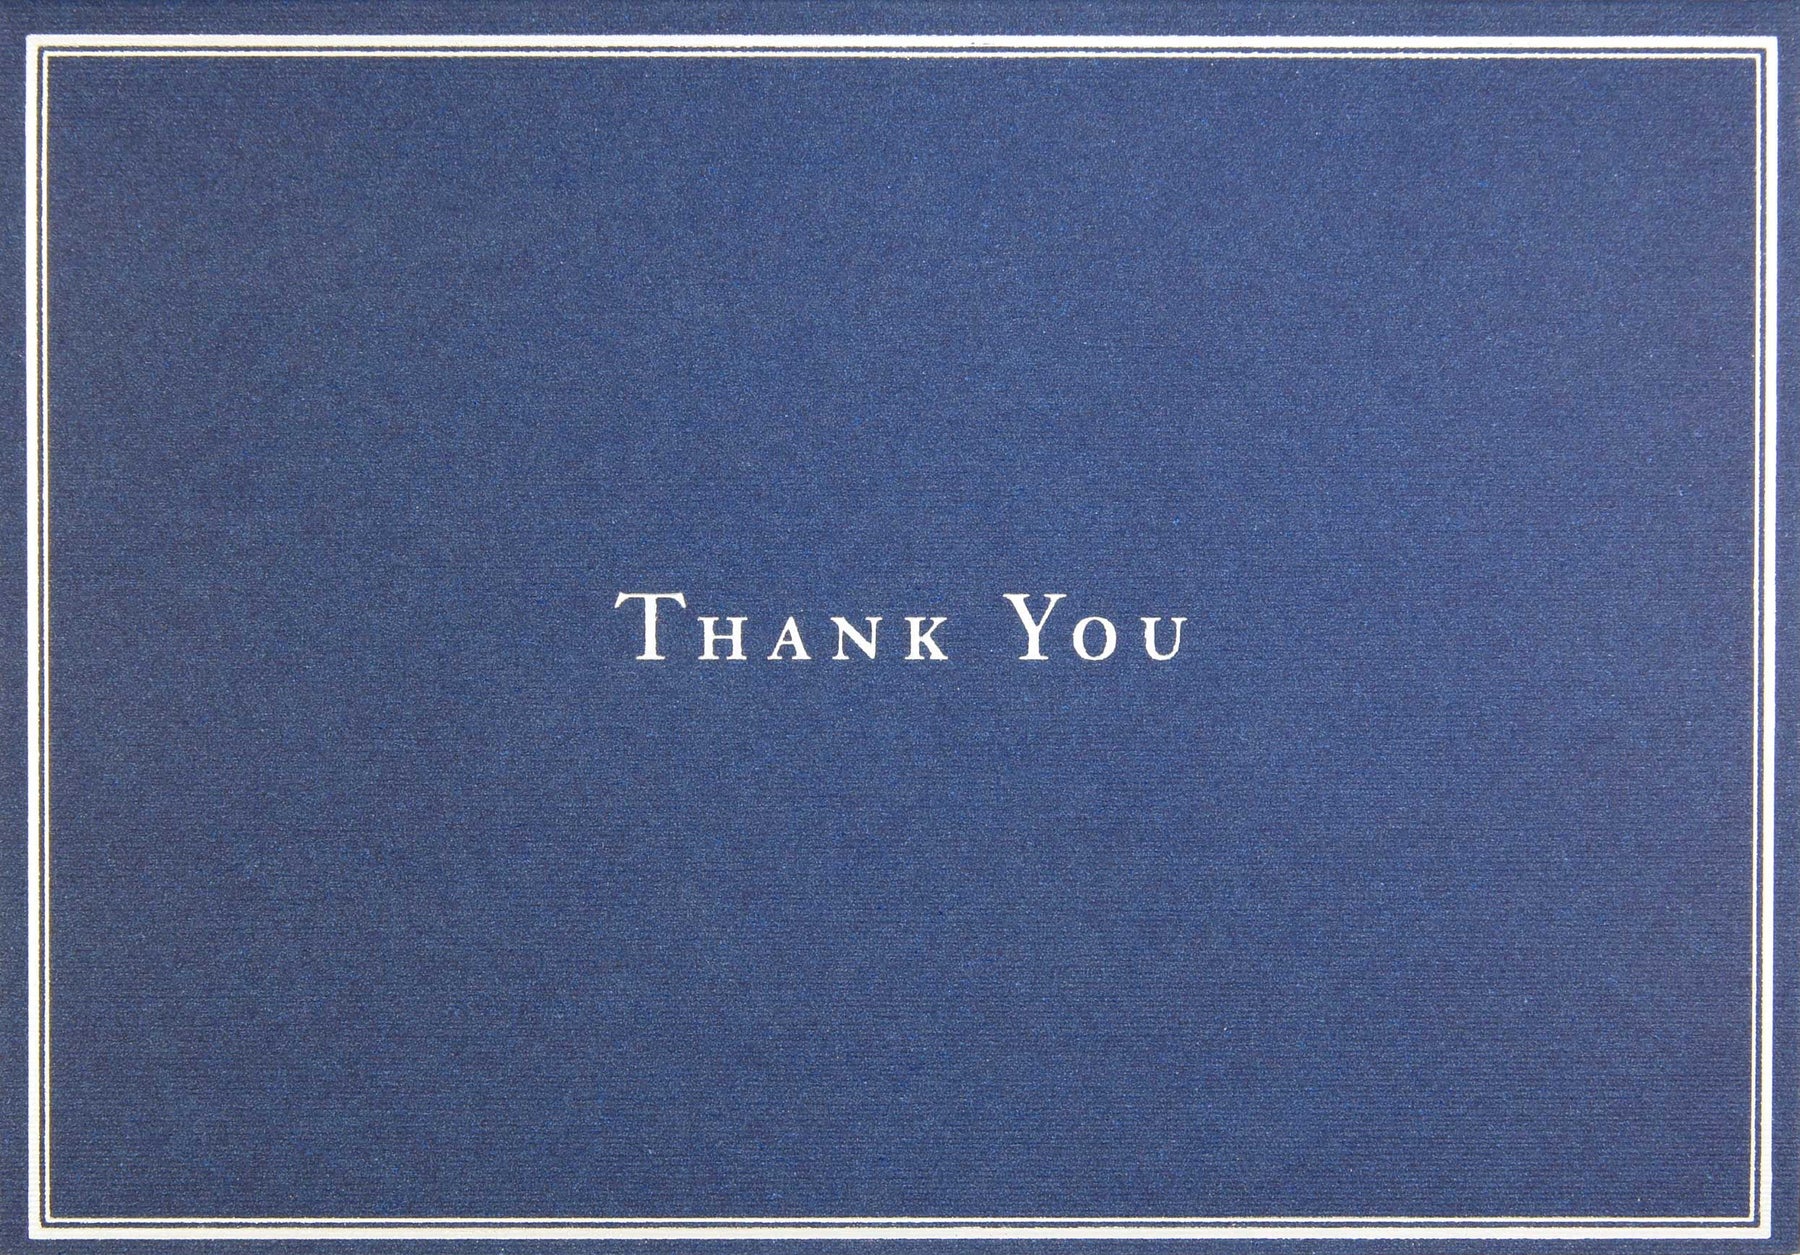 100 Thank You Cards with Envelopes and Stickers - 5 Unique Navy Blue  Designs Bulk Blank Notes Luxury UV Printing for Business, Formal and All